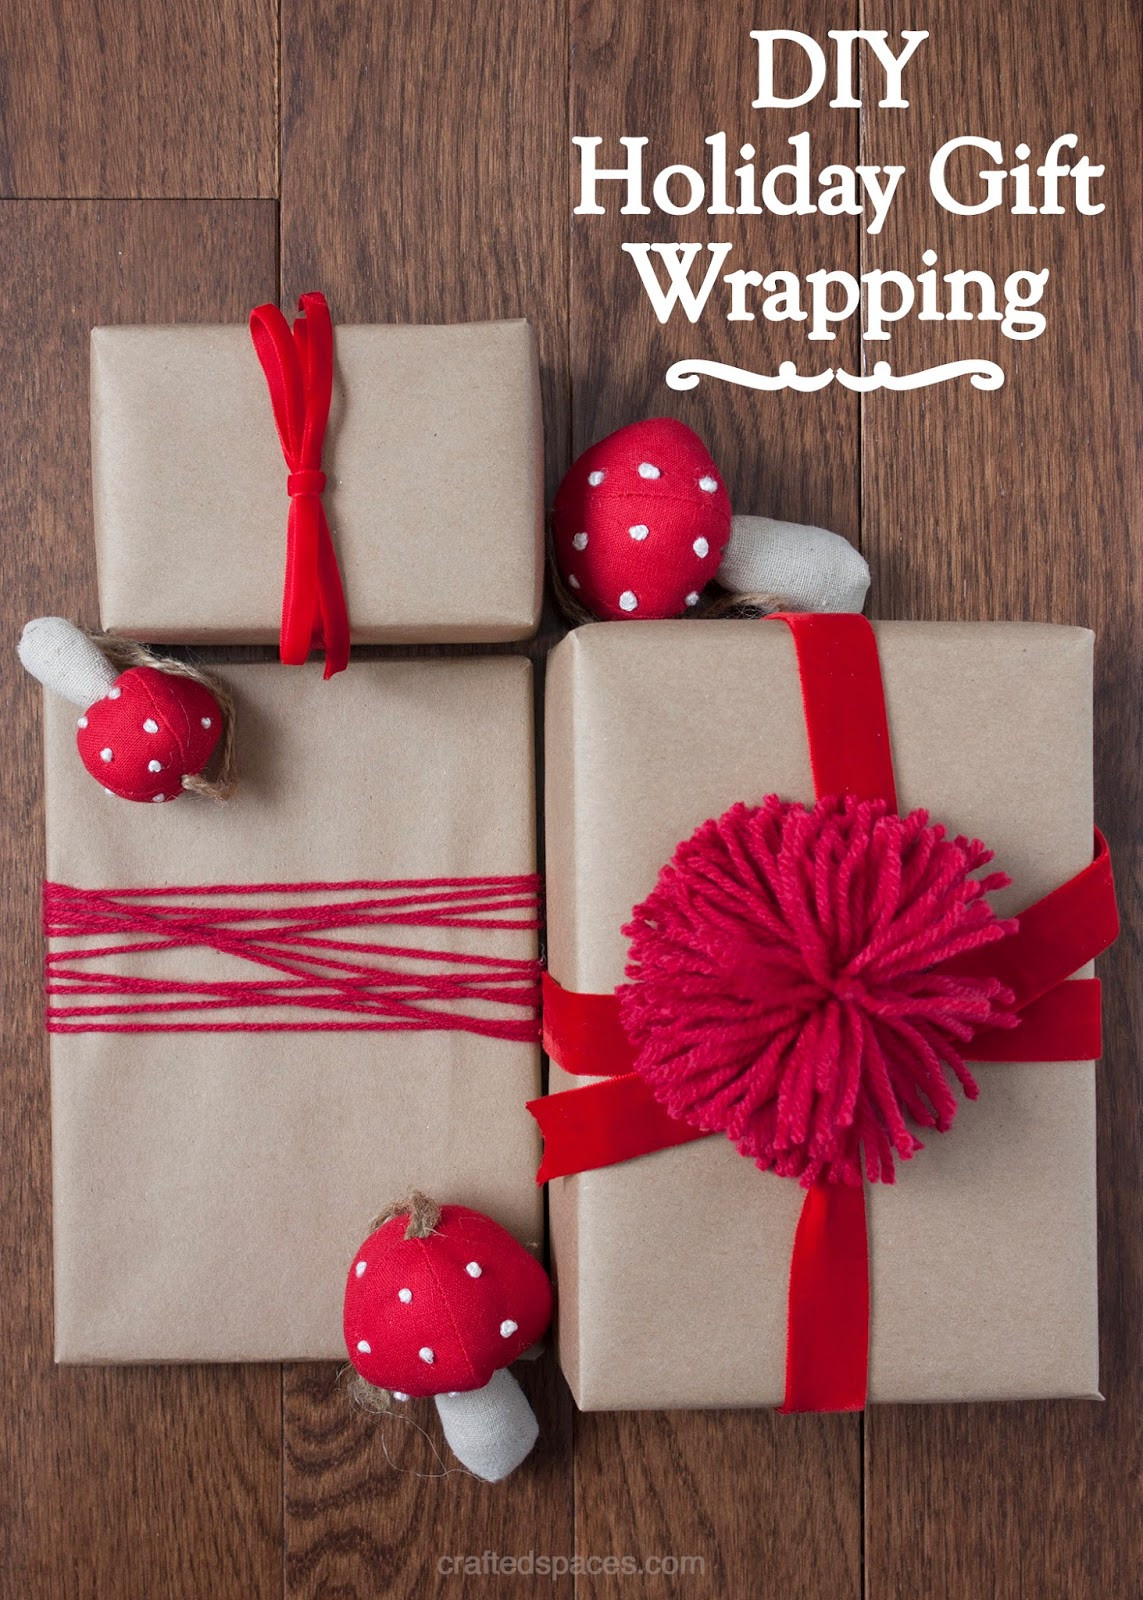 DIY Gift Wrap
 Crafted Spaces DIY Holiday Gift Wrapping